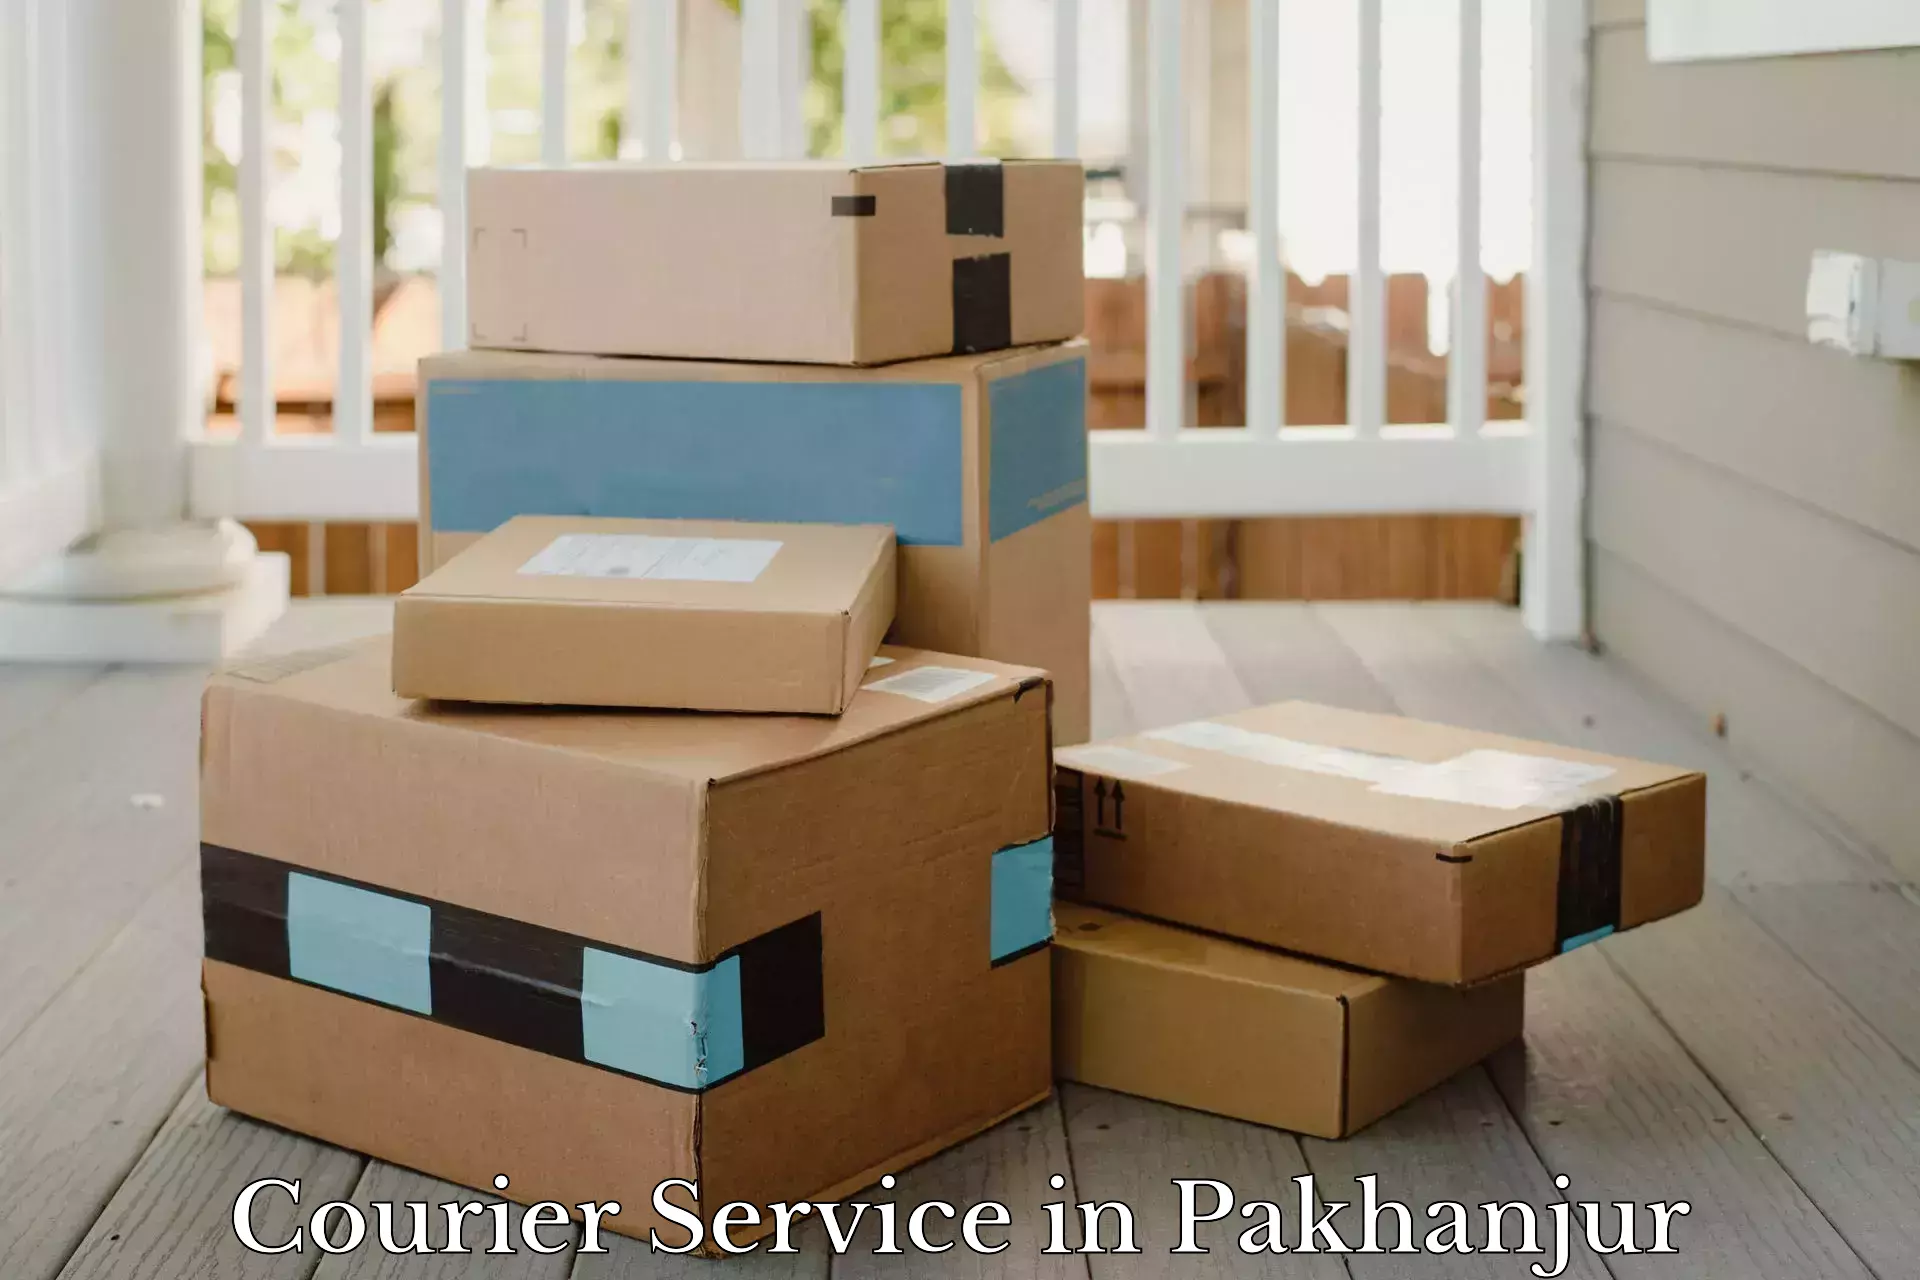 Rapid shipping services in Pakhanjur